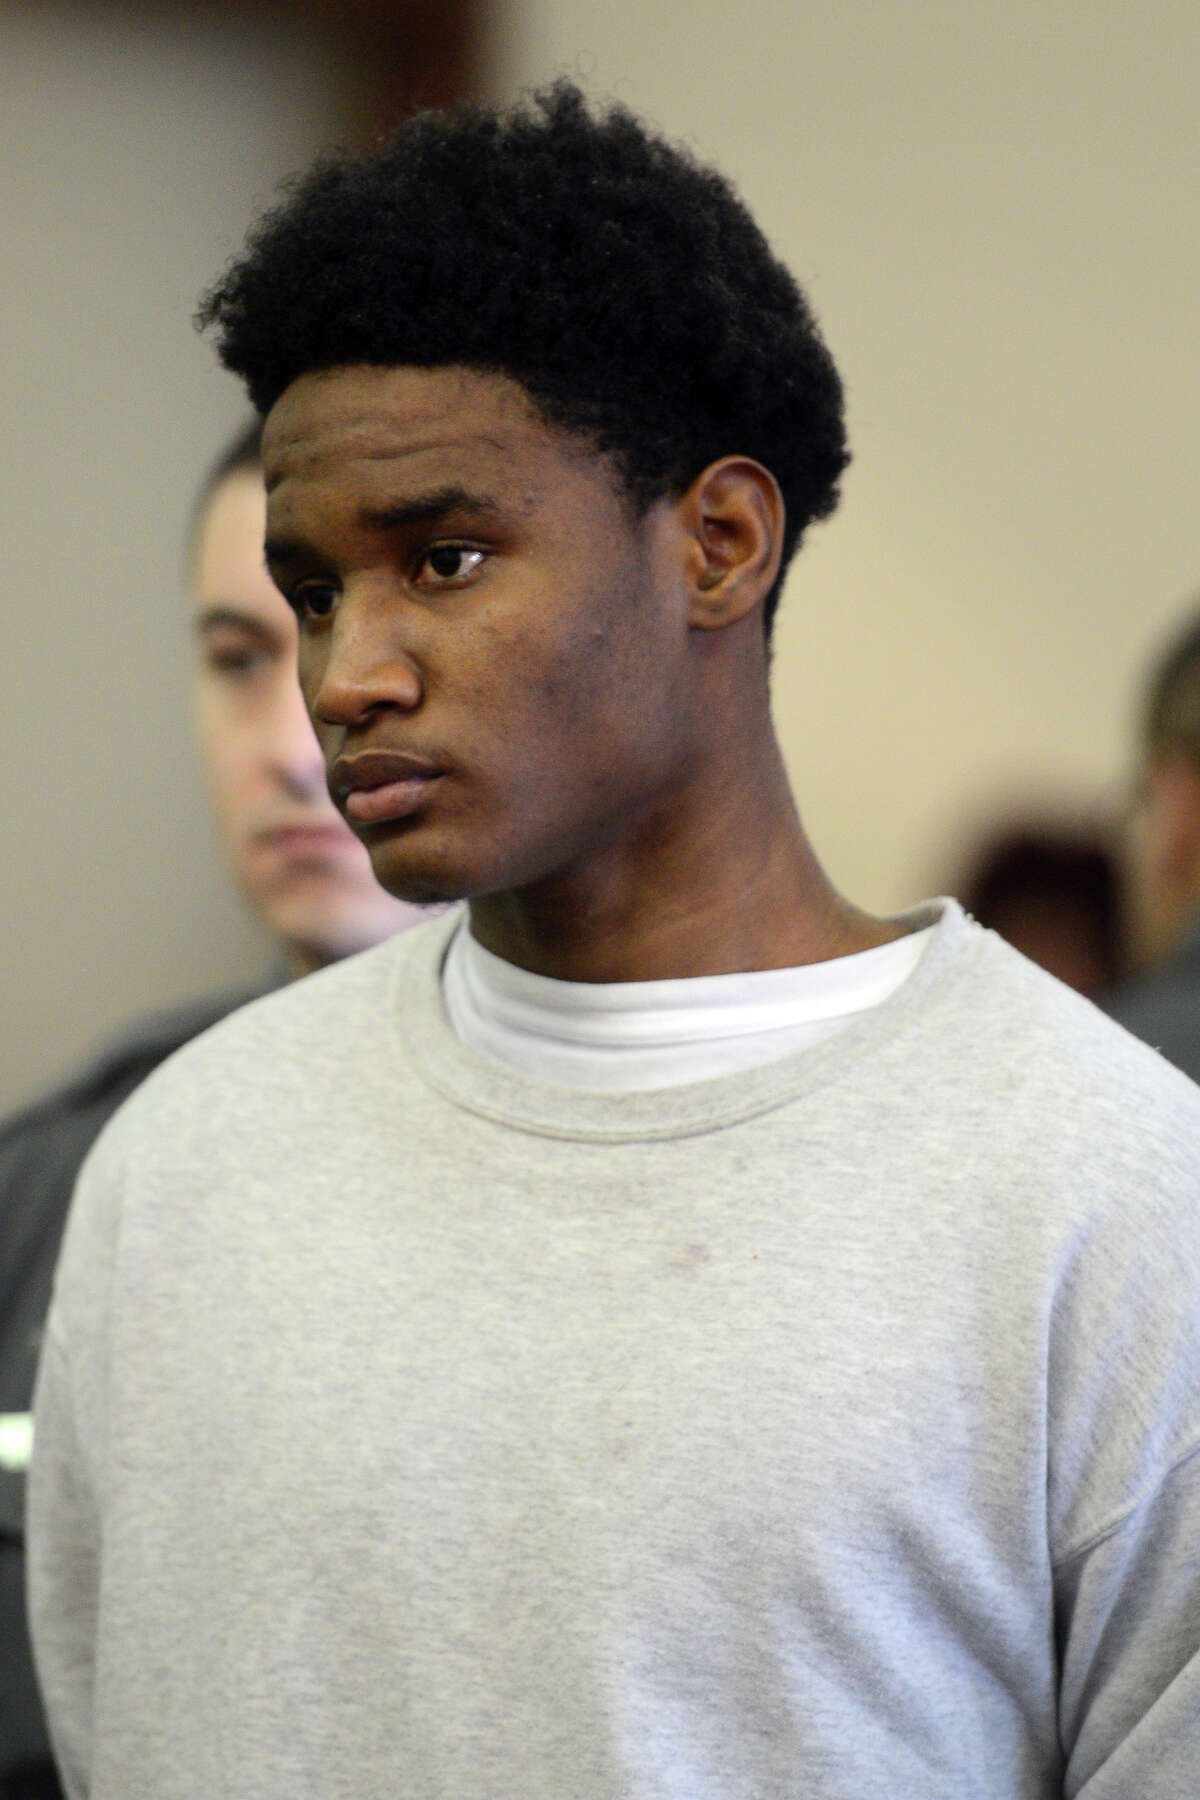 Bridgeport man pleads guilty to fatally shooting 12 year old boy